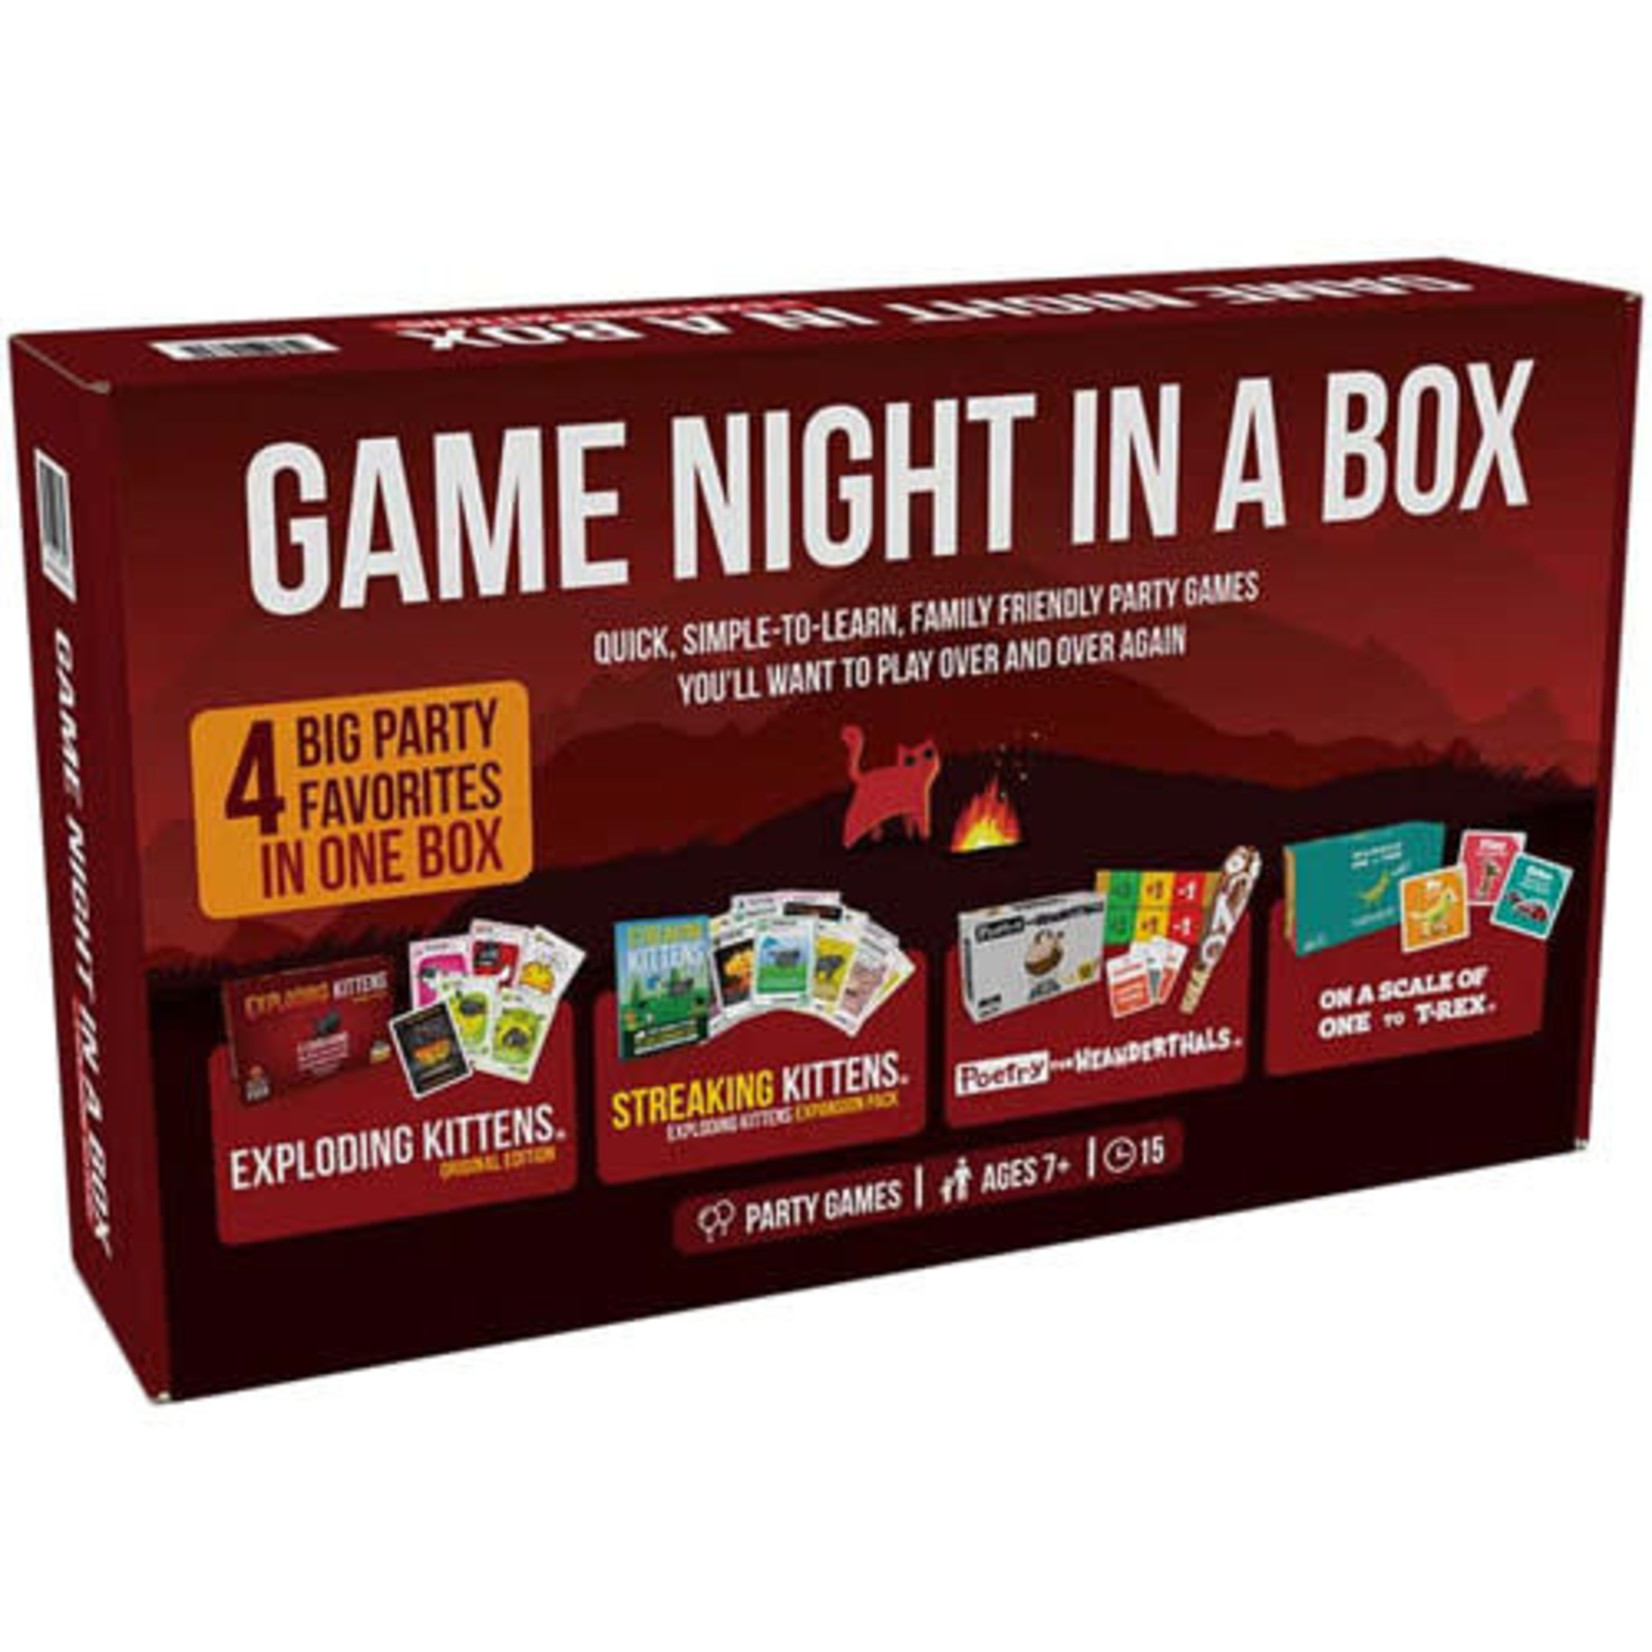 Exploding Kittens Game Night in a Box Bundle 1 by Exploding Kittens